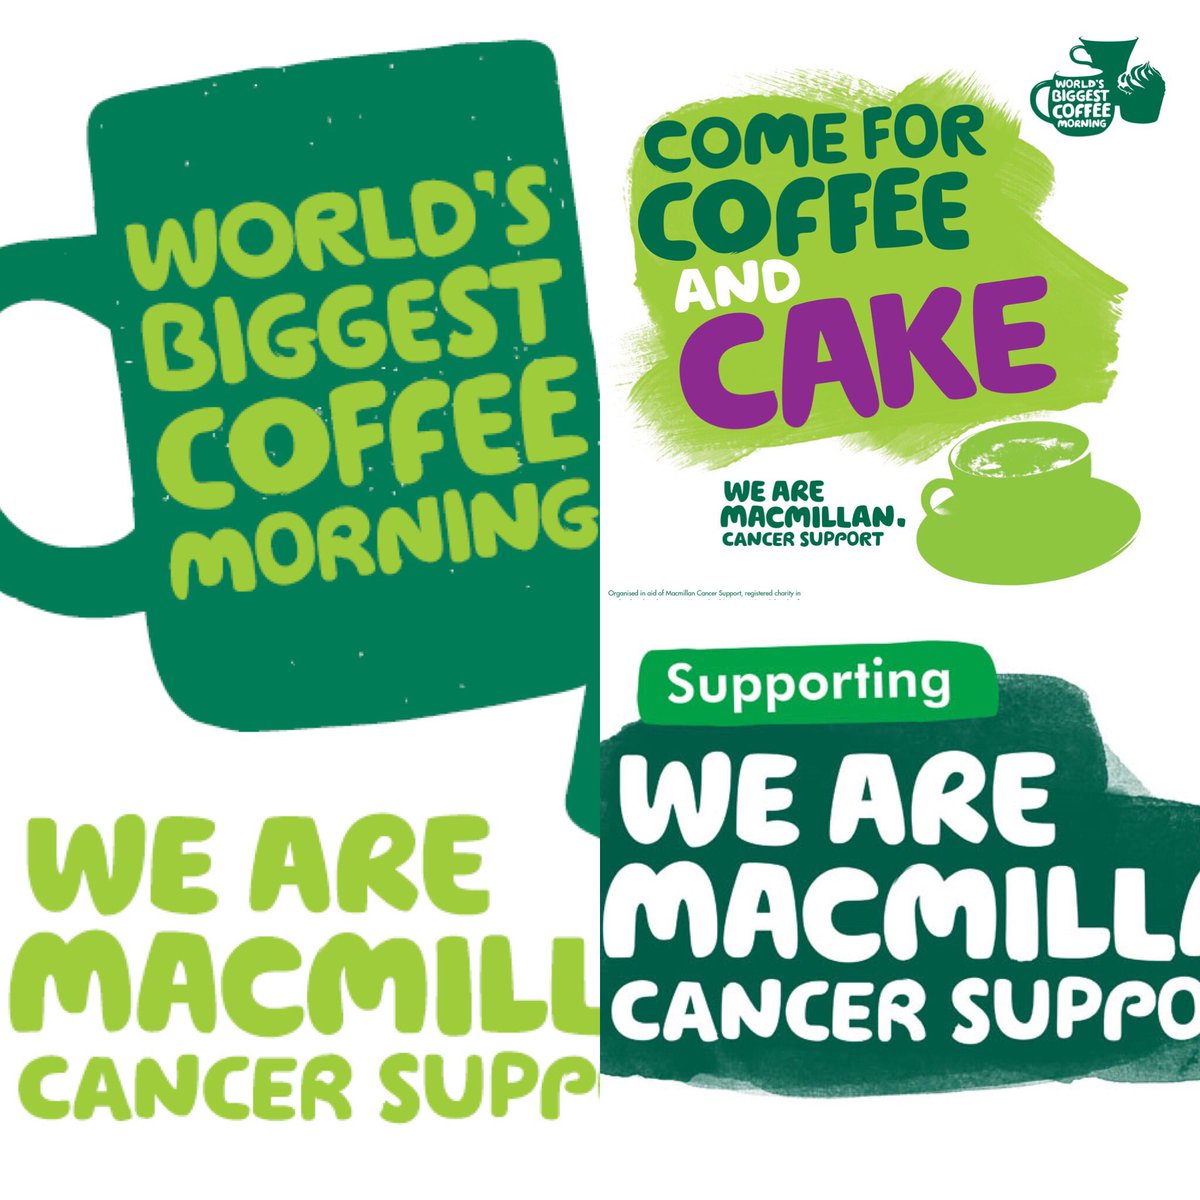 Come join us 29th September 10am till 2pm #macmillliancoffeemorning #coffeeandacake @WSGeducation @arch_recruitltd #Nostellpriory